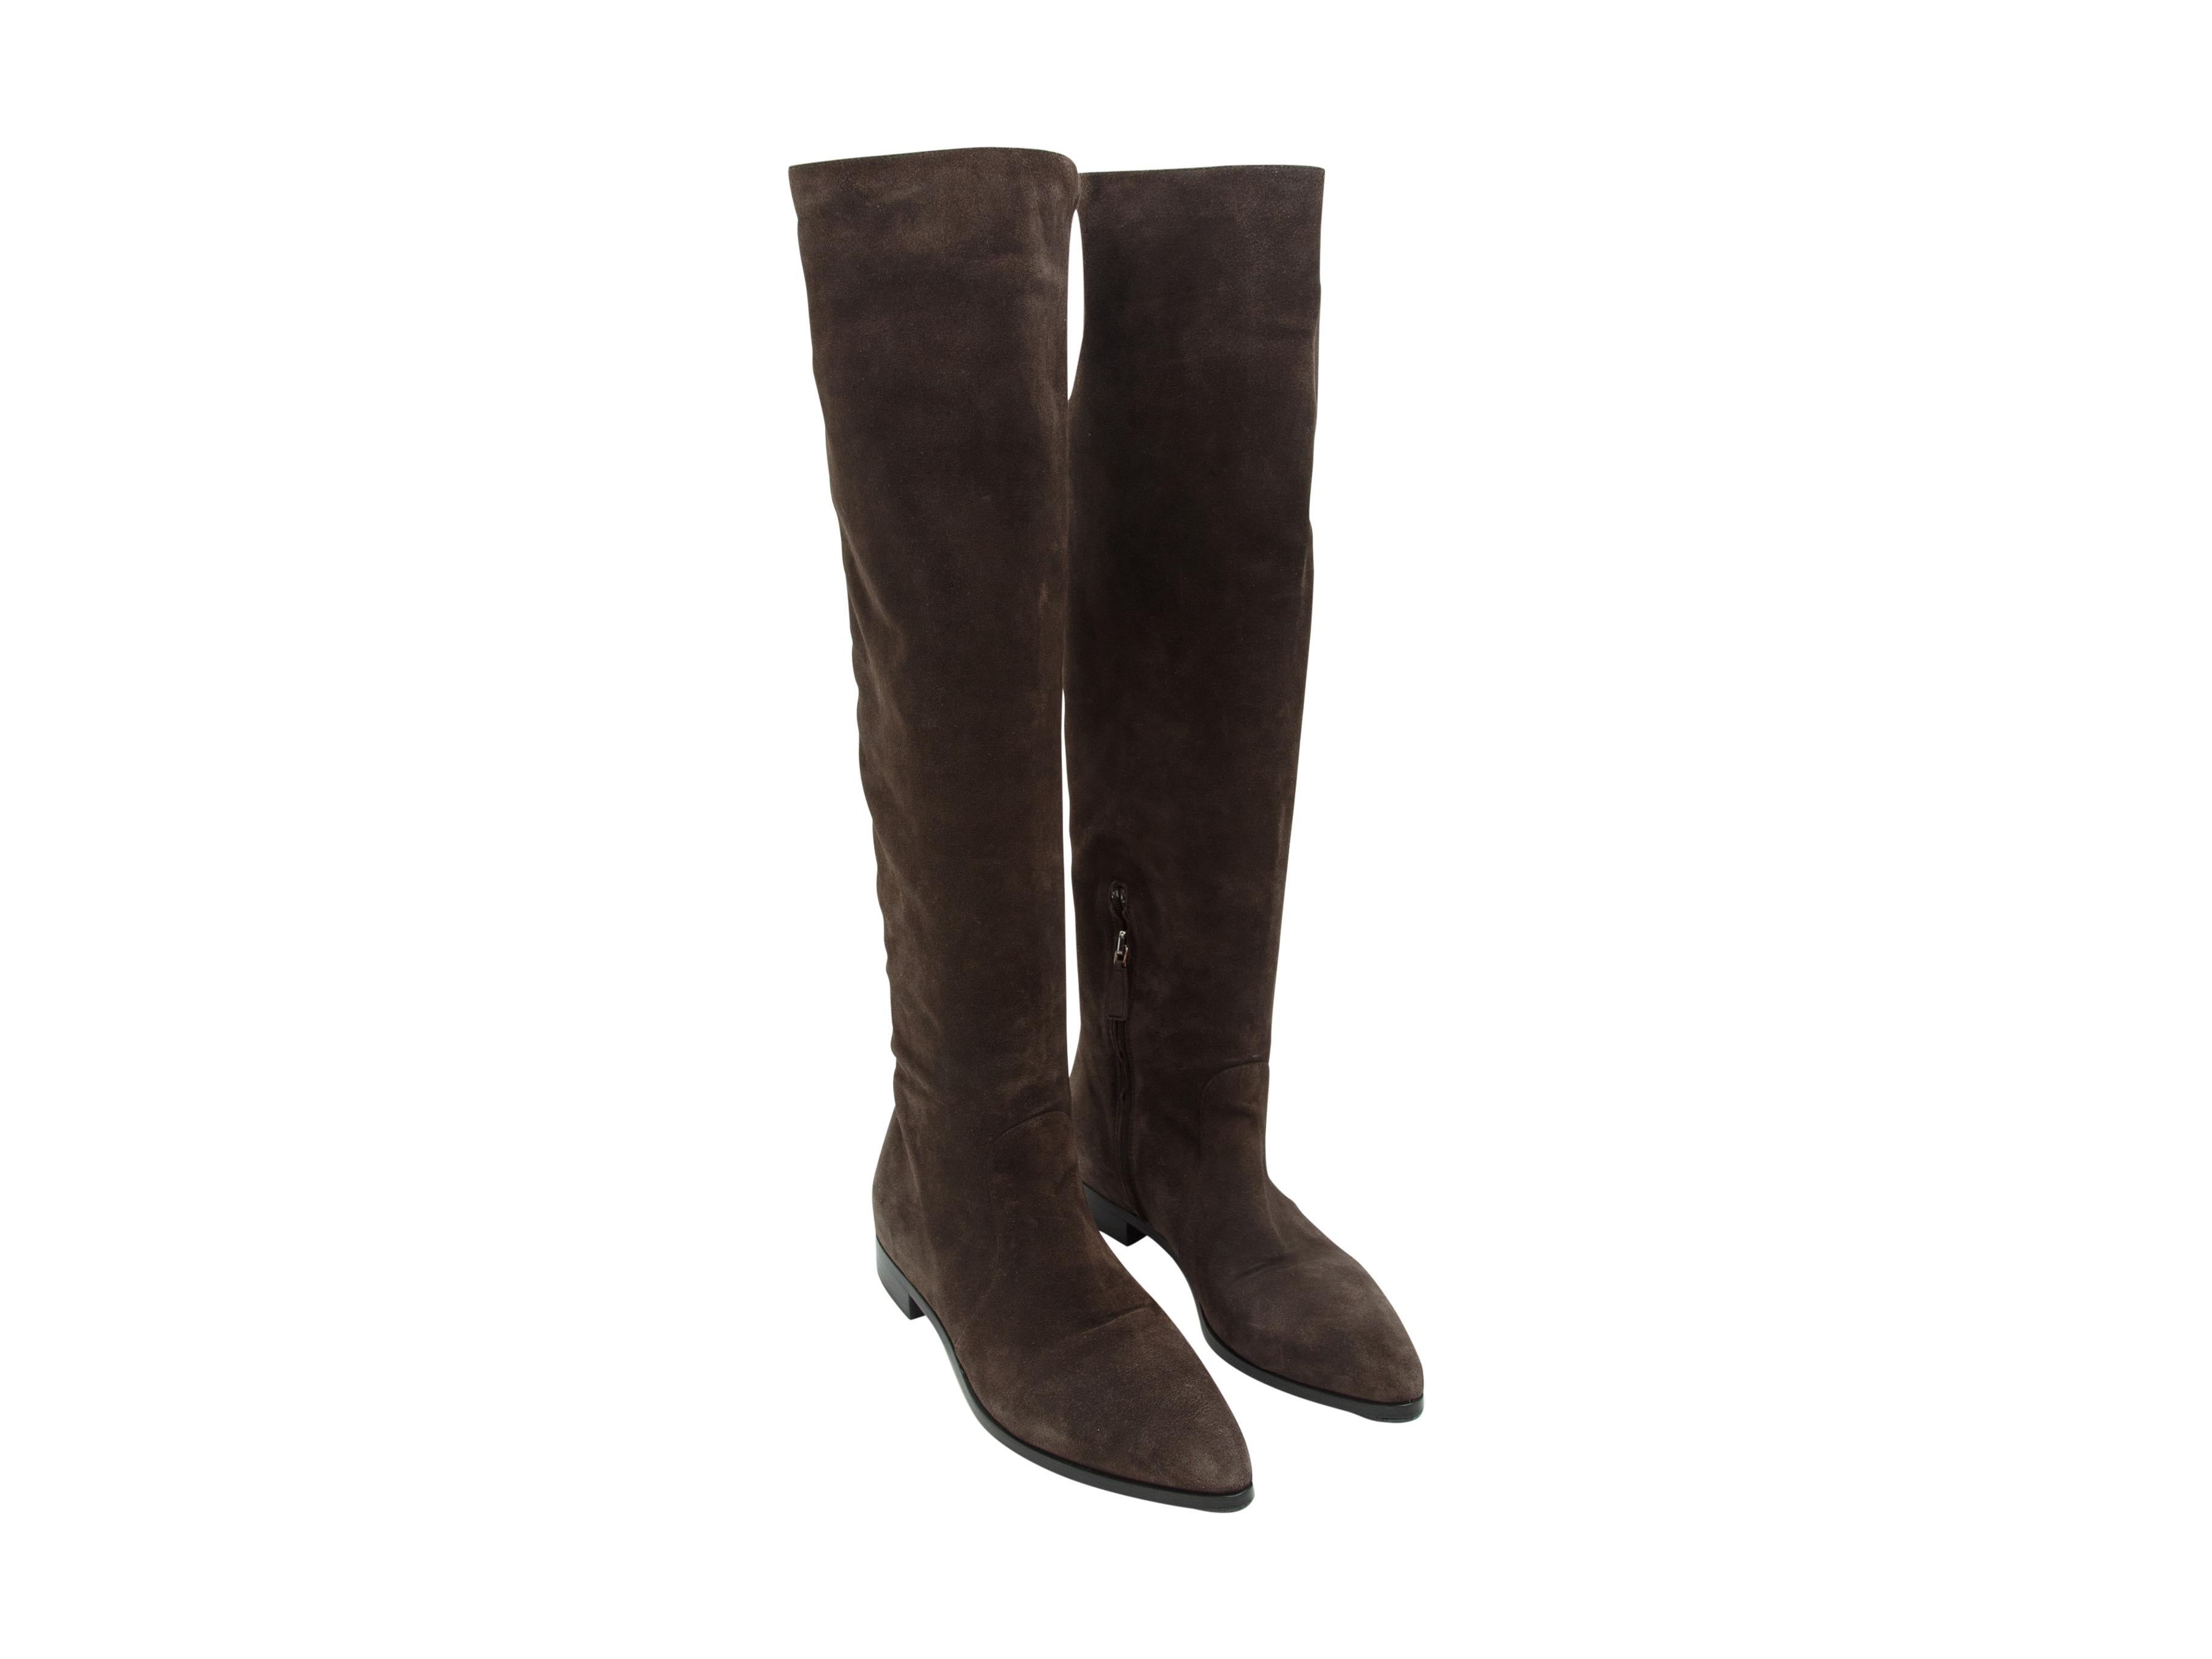 Product details:  Brown knee-high flat suede boots by Prada.  Inner quarter zip closure.  Point toe.  
Condition: Pre-owned. Very good. 
Est. Retail $ 1,100.00